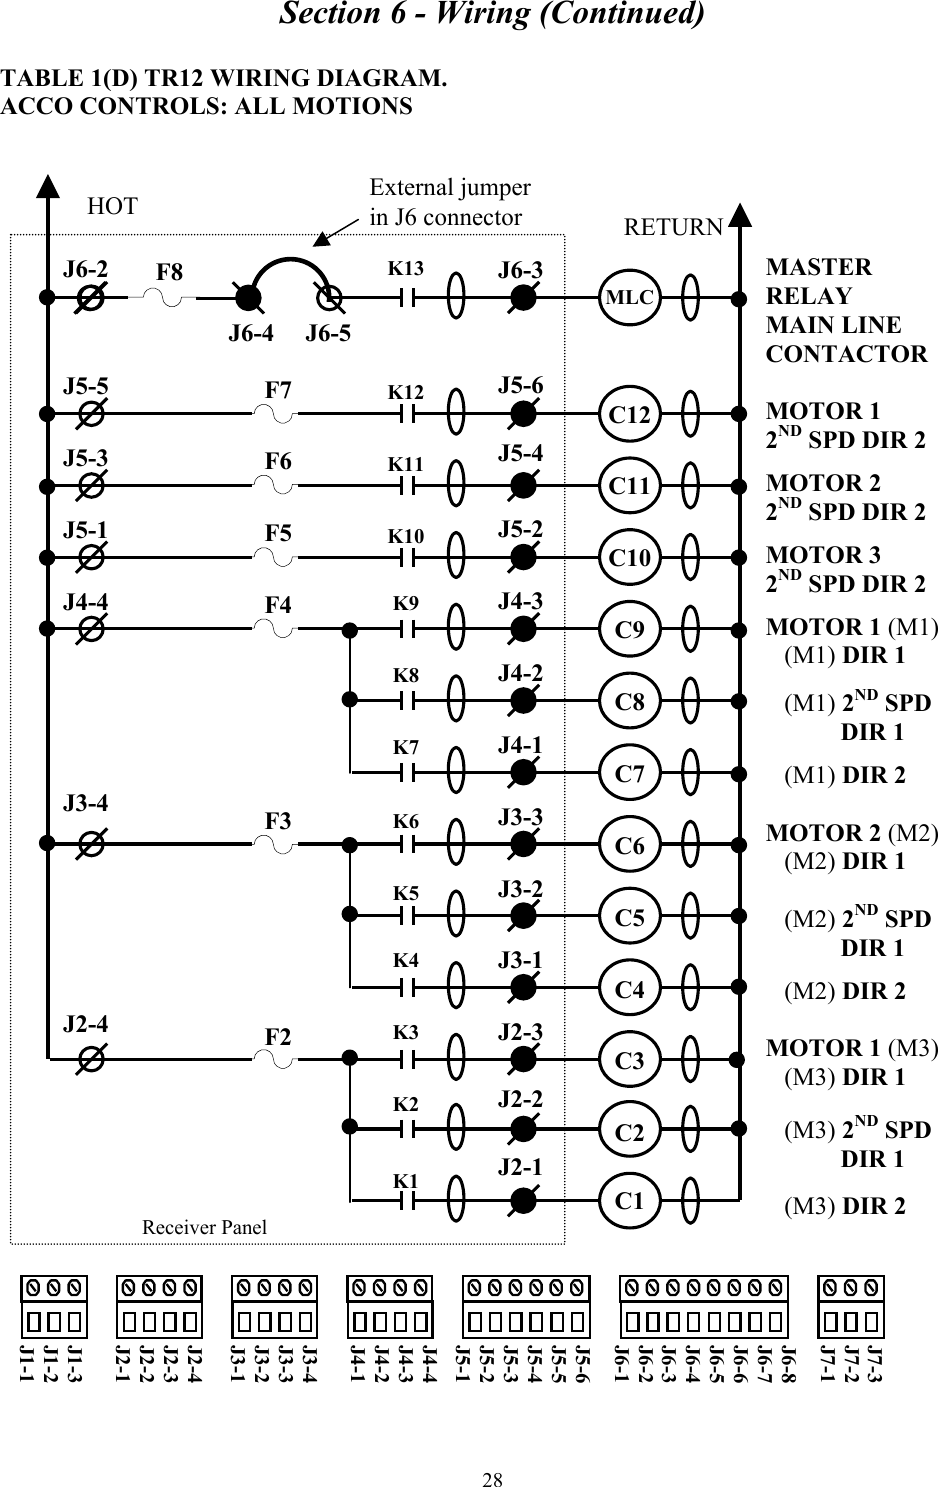 Section 6 - Wiring (Continued) 28 TABLE 1(D) TR12 WIRING DIAGRAM. ACCO CONTROLS: ALL MOTIONS   MASTER  RELAY MAIN LINE CONTACTOR  MOTOR 1 2ND SPD DIR 2  MOTOR 2 2ND SPD DIR 2  MOTOR 3 2ND SPD DIR 2  MOTOR 1 (M1)    (M1) DIR 1     (M1) 2ND SPD               DIR 1     (M1) DIR 2  MOTOR 2 (M2)    (M2) DIR 1     (M2) 2ND SPD               DIR 1     (M2) DIR 2  MOTOR 1 (M3)    (M3) DIR 1     (M3) 2ND SPD               DIR 1     (M3) DIR 2      Receiver Panel J6-2    J5-5  J5-3  J5-1  J4-4      J3-4        J2-4 J6-3    J5-6  J5-4   J5-2  J4-3  J4-2  J4-1  J3-3  J3-2  J3-1  J2-3  J2-2  J2-1 HOT  RETURN K13     K12   K11   K10   K9   K8   K7   K6   K5   K4   K3   K2   K1 MLC    C12  C11  C10  C9  C8  C7  C6  C5  C4  C3  C2  C1     F7  F6  F5  F4      F3        F2  J7-3 J7-2 J7-1  J6-8 J6-7 J6-6 J6-5 J6-4 J6-3 J6-2 J6-1   J5-6 J5-5 J5-4 J5-3 J5-2 J5-1  J4-4 J4-3 J4-2 J4-1  J3-4 J3-3 J3-2 J3-1  J2-4 J2-3 J2-2 J2-1  J1-3 J1-2 J1-1 External jumper in J6 connector J6-4     J6-5 F8 